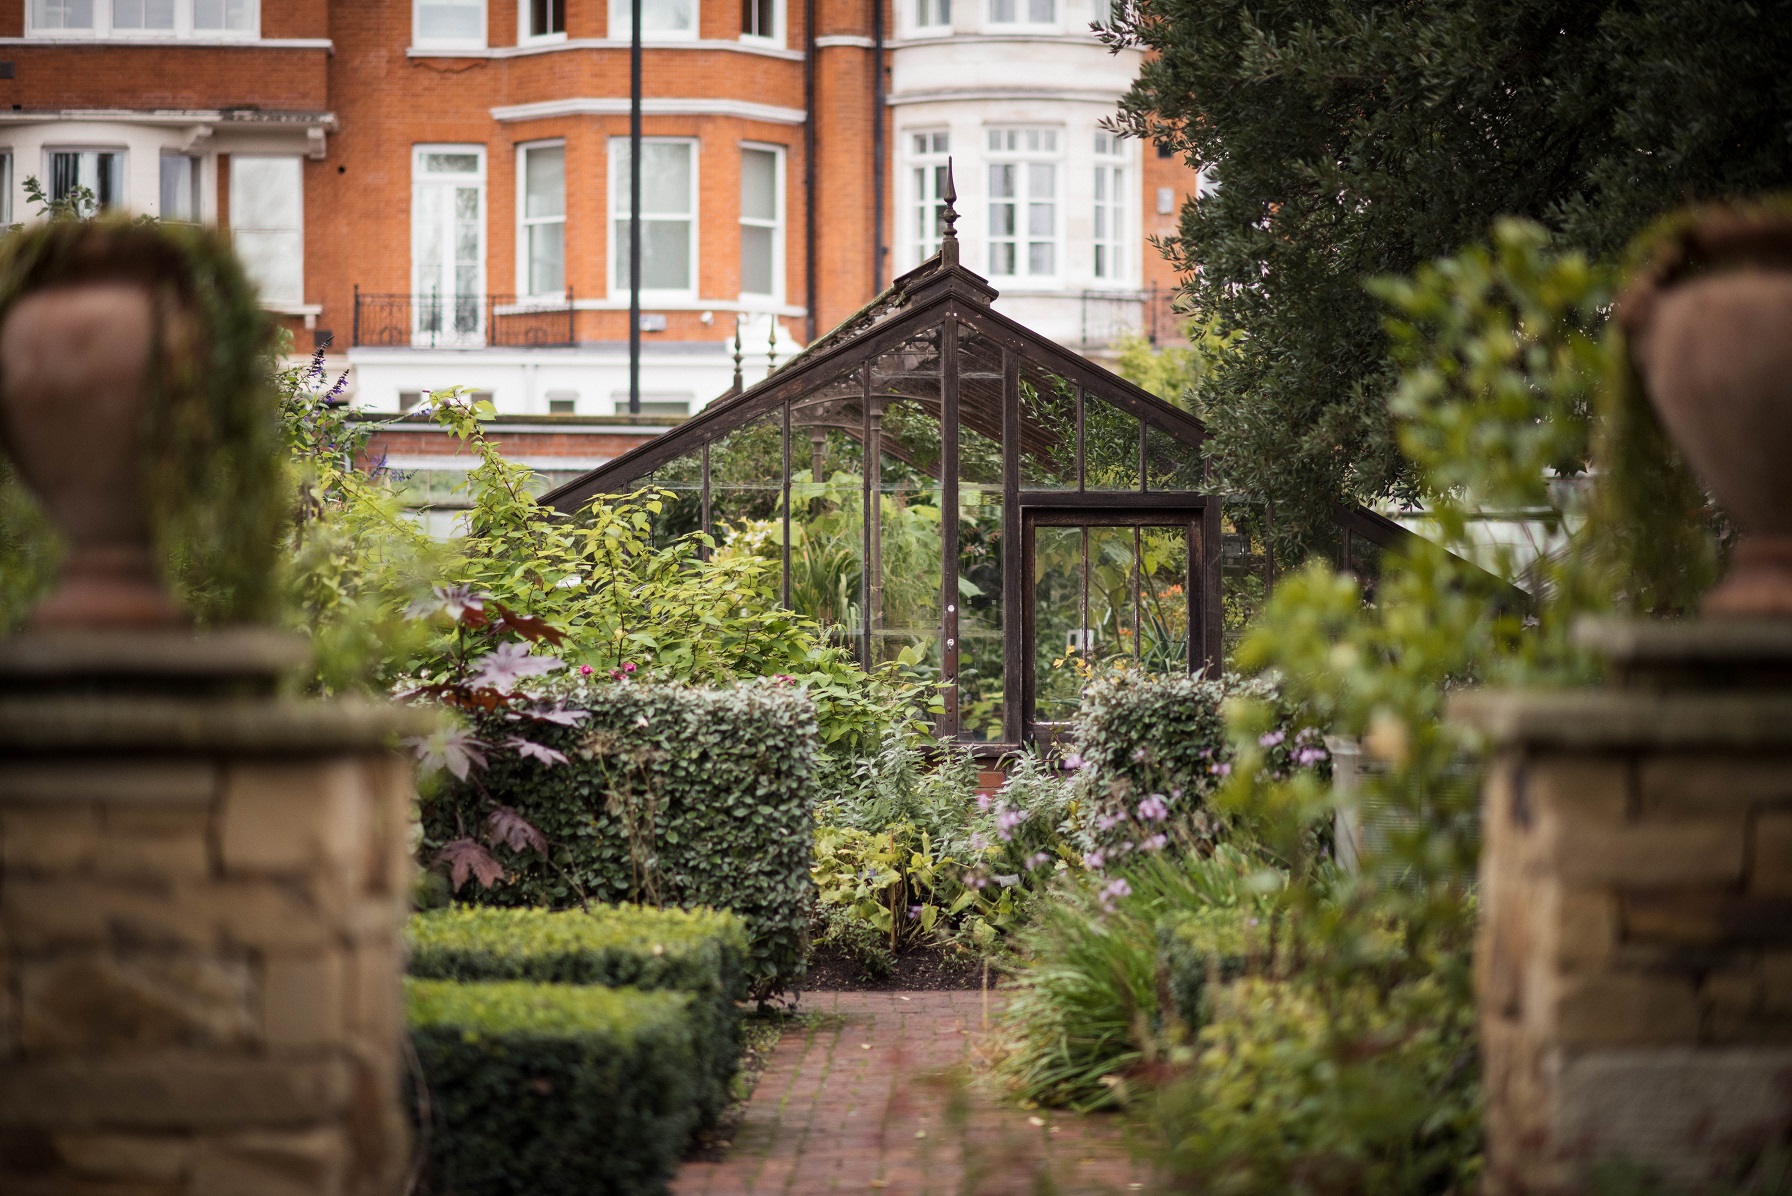 Objects, Stories and Significance of Chelsea Physic Garden